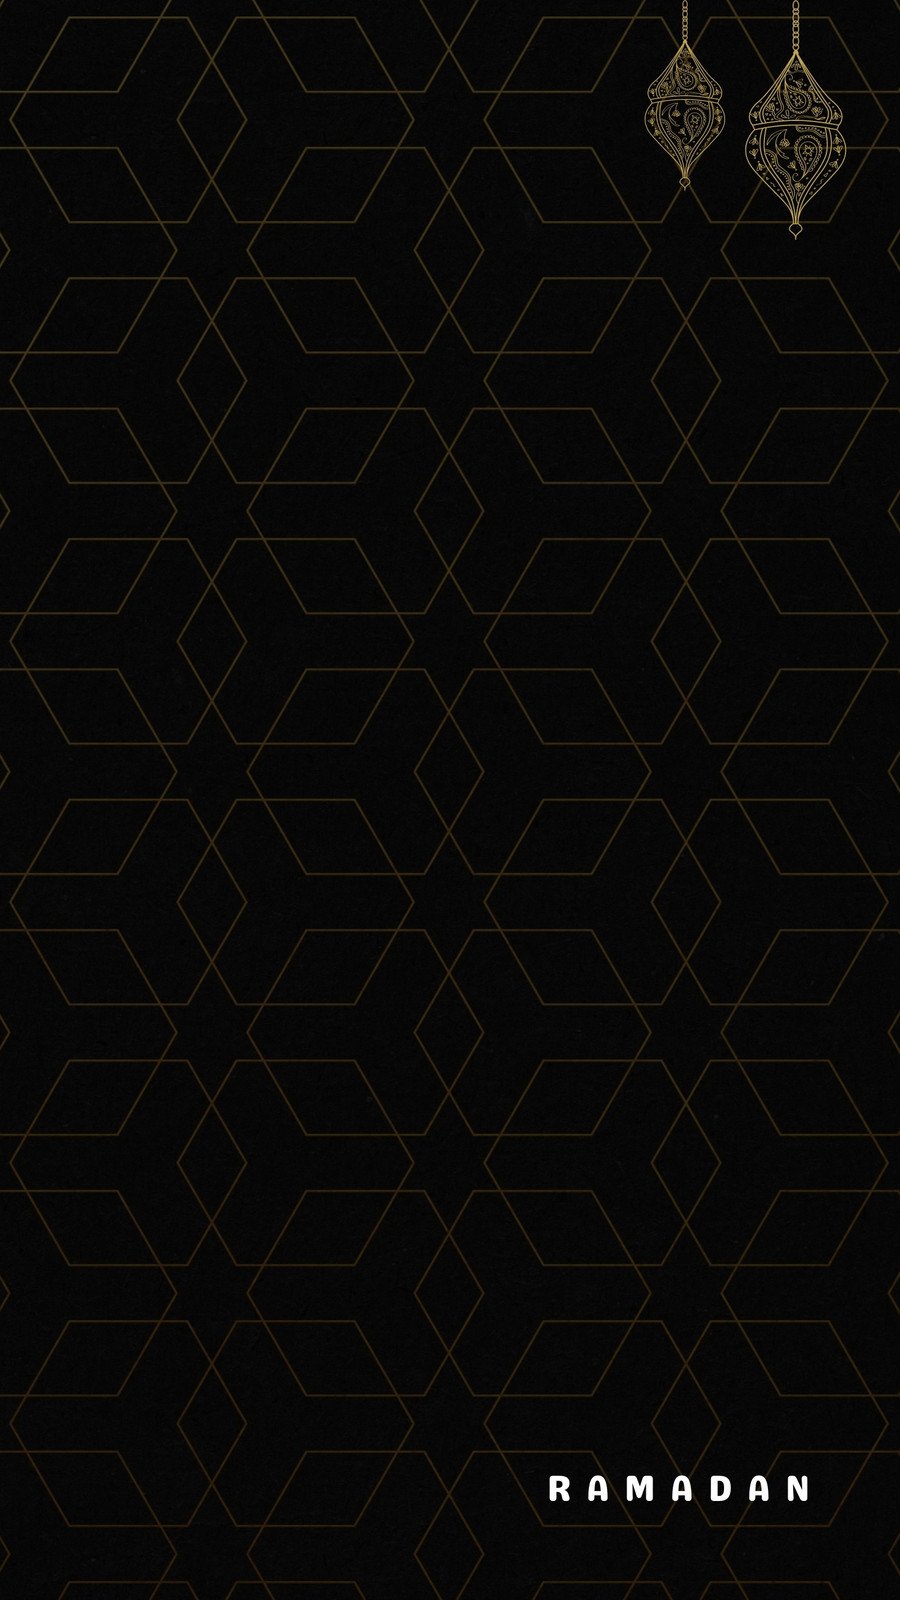 Free and customizable black wallpaper templates